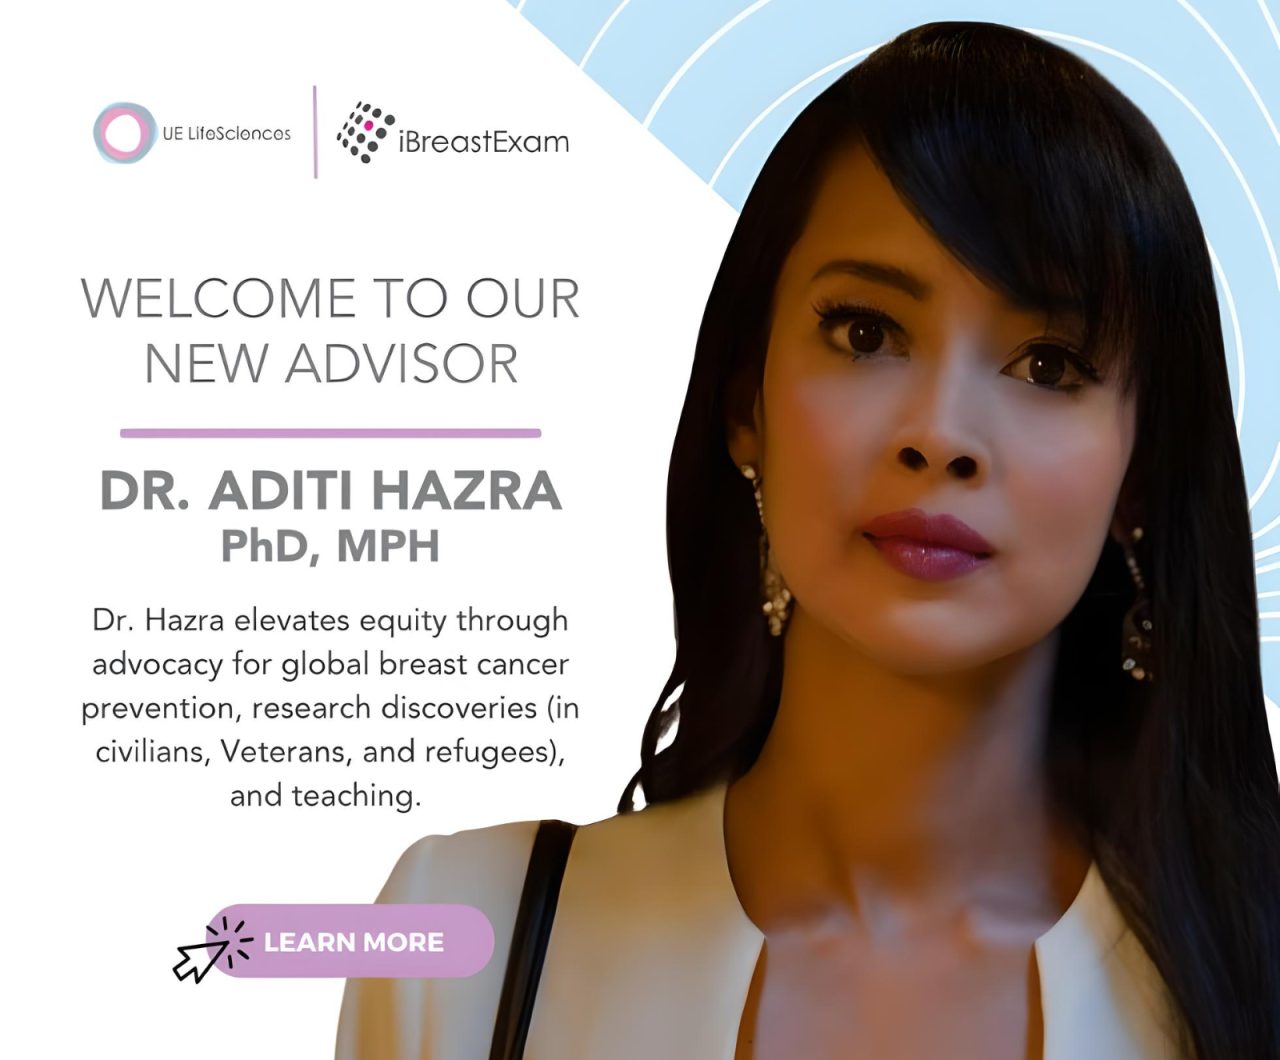 We are thrilled to announce the latest addition to our esteemed advisory board, Dr. Aditi Hazra, whose wealth of knowledge and extensive experience will play a pivotal role in advancing our mission of global breast cancer prevention. – UE LifeSciences